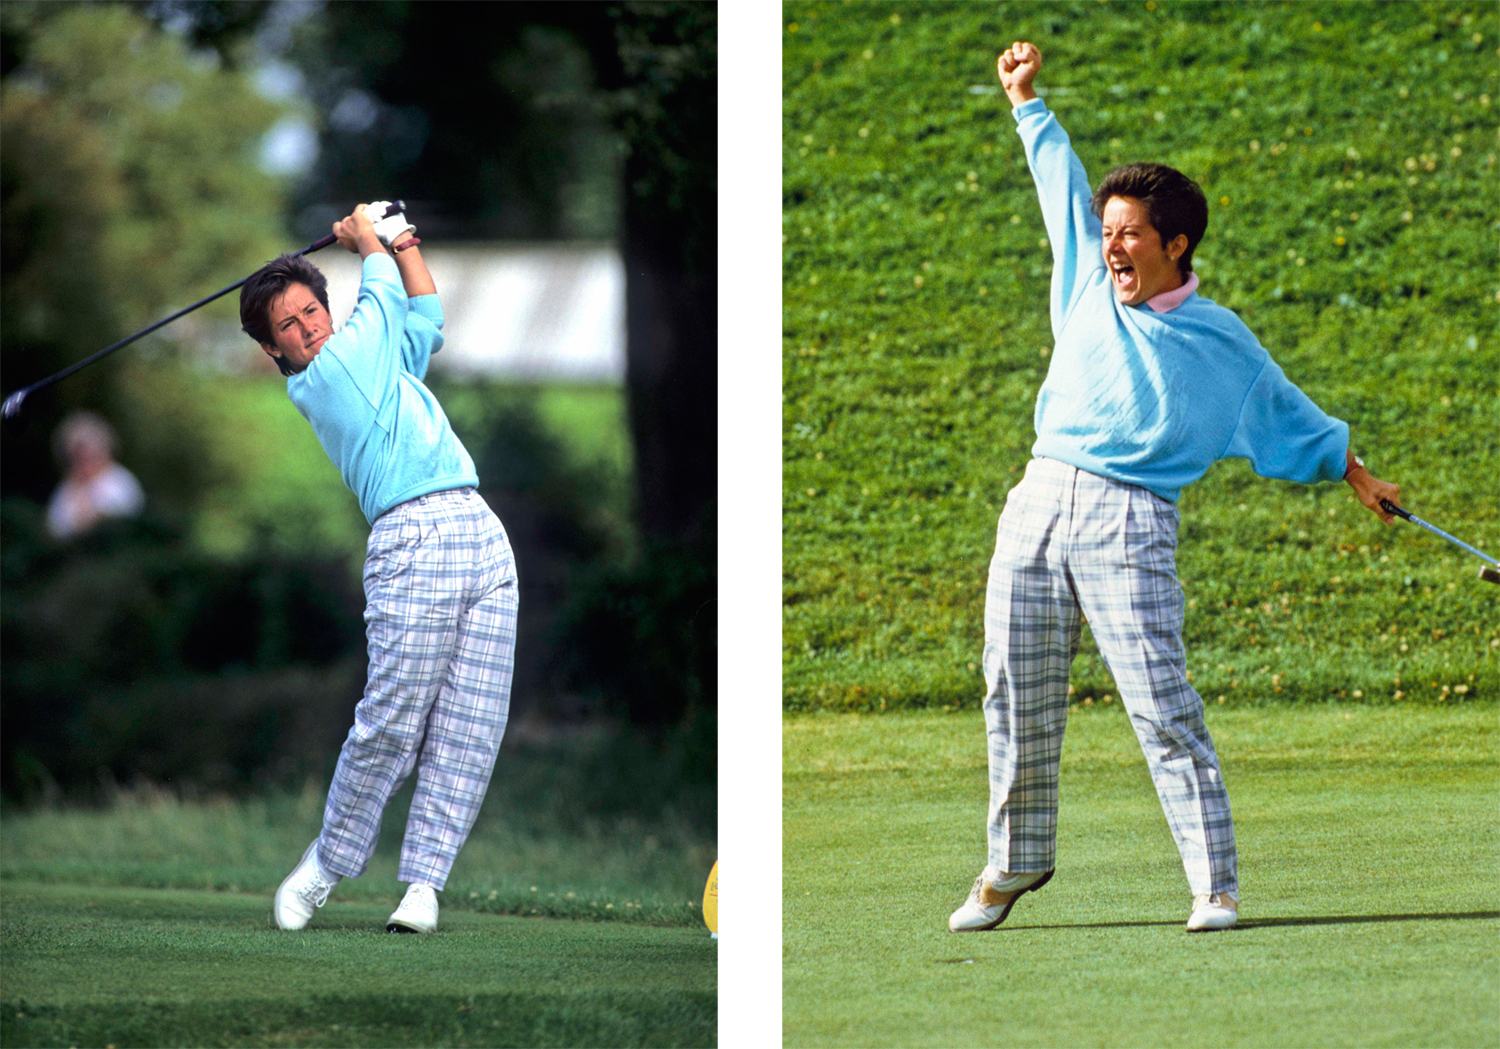 Alison Nicholas on the tee (left) and celebrating her win (right) at the 1987 Women's British Open Championship. Photographs by Lawrence Levy, from the University of St Andrews Library Photographic Collection.